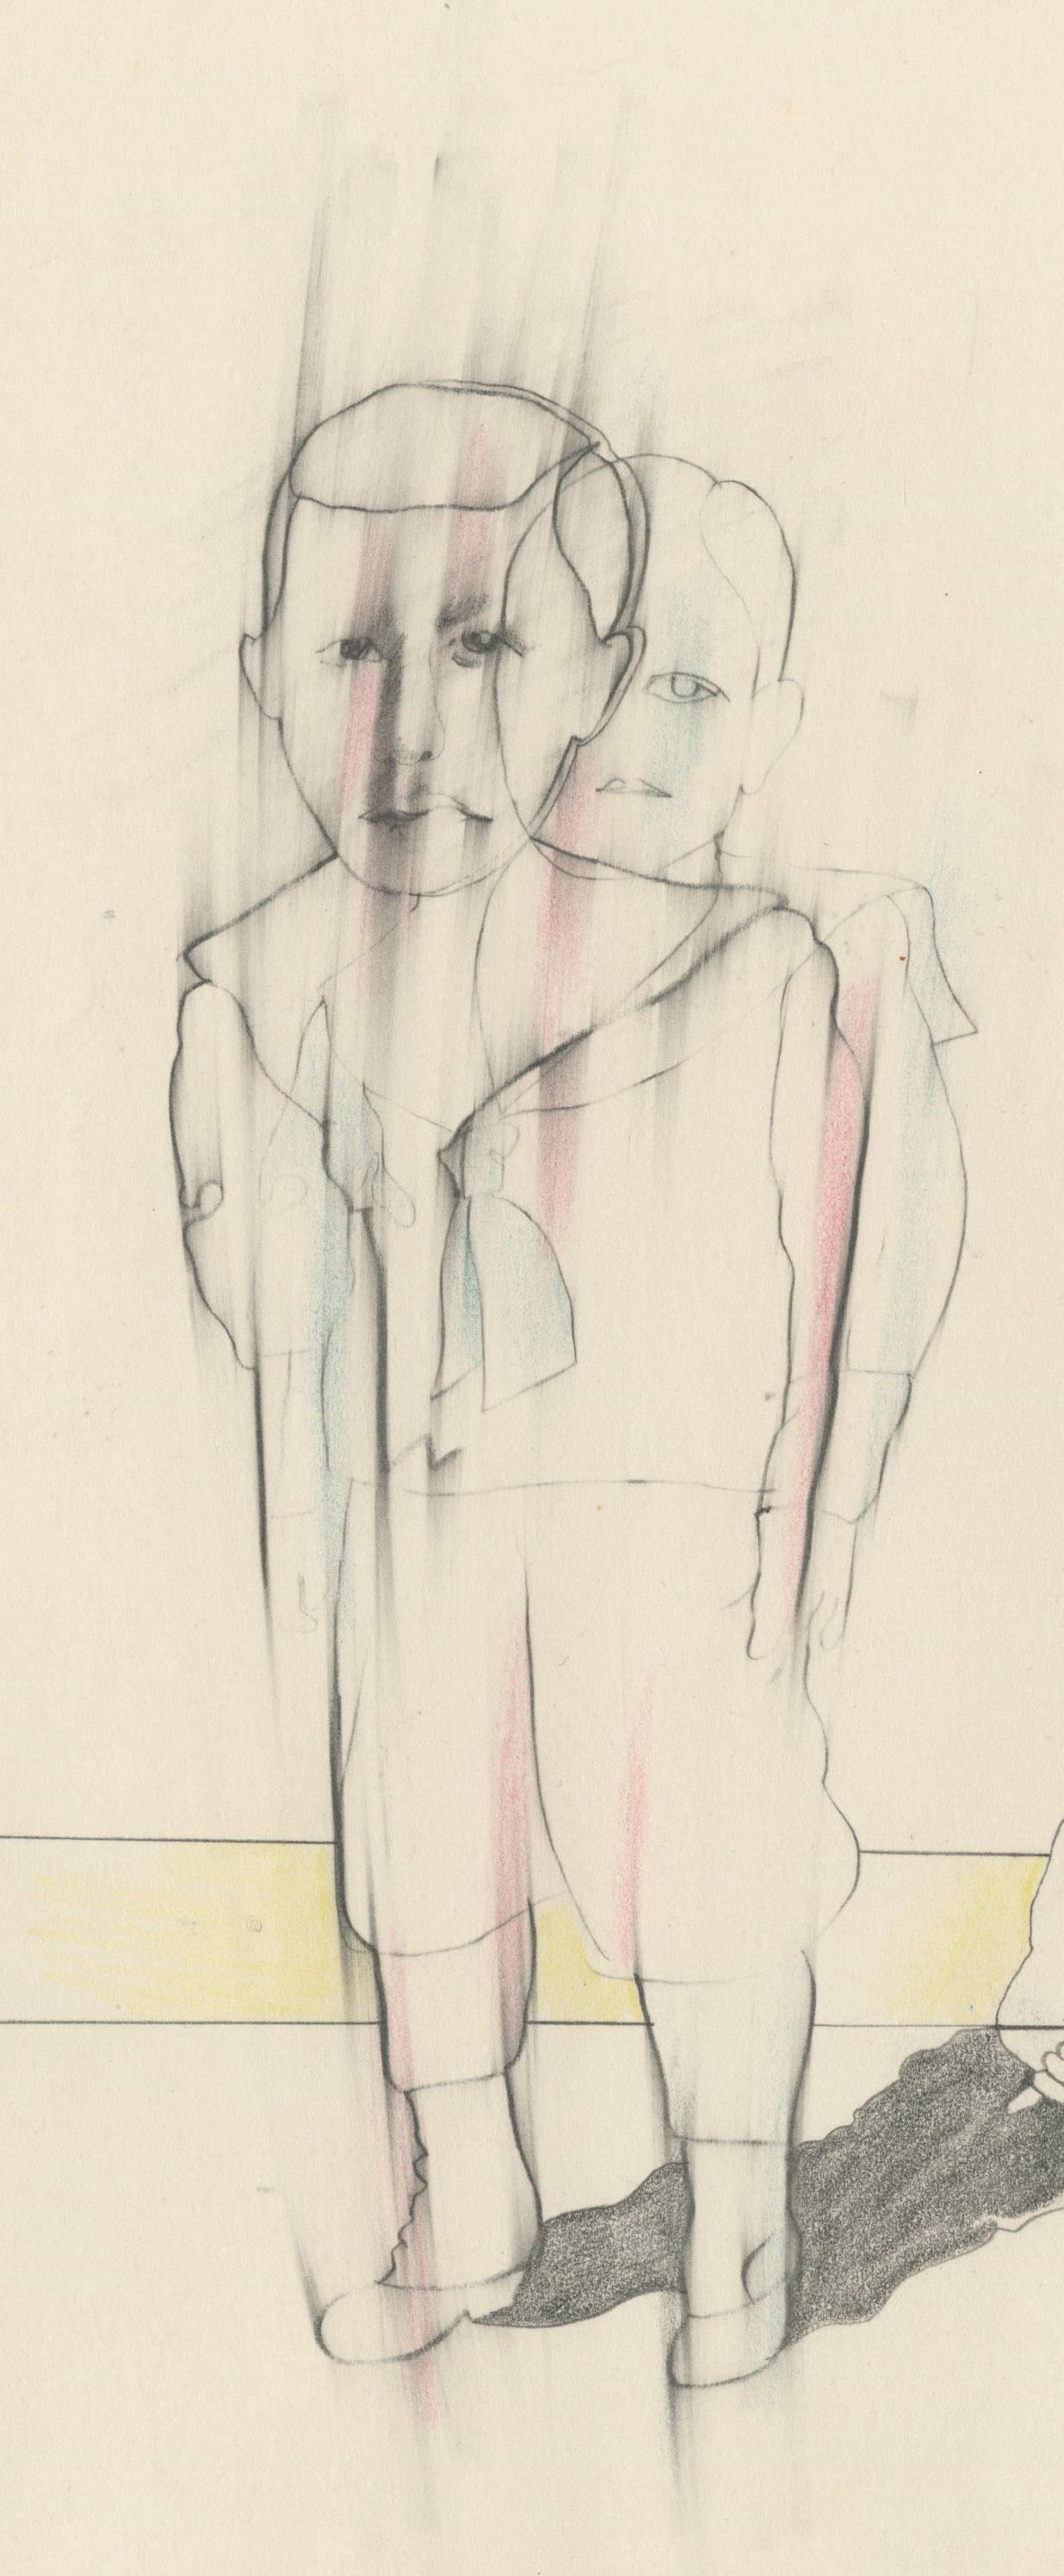 Two Boys (one standing, the other seated and drawing) - Contemporary Art by Mary Spain